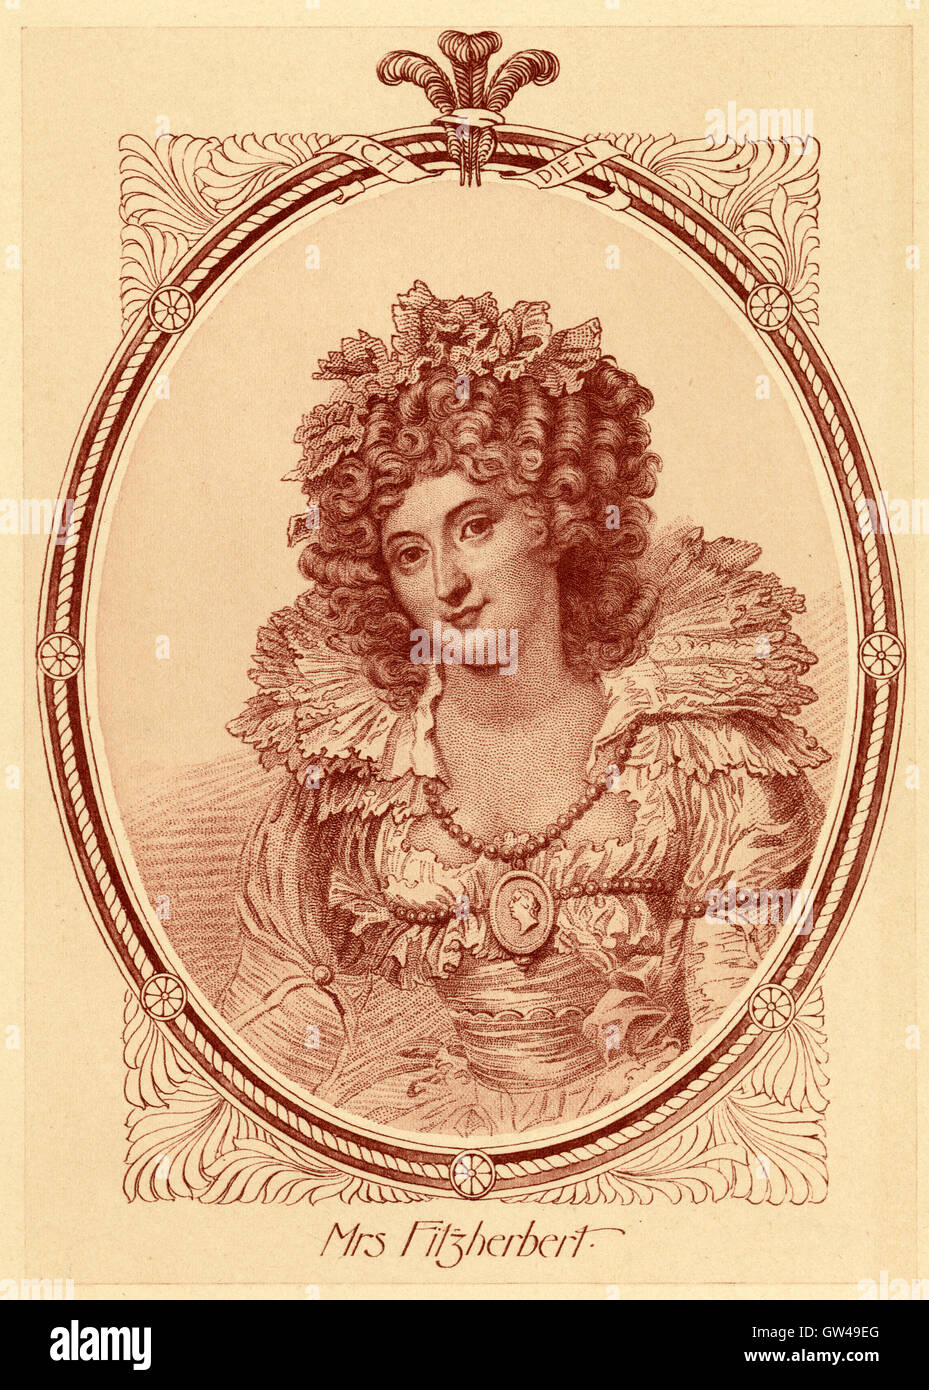 Antique c1890 engraving, Mrs. Fitzherbert. Maria Anne Fitzherbert (1756-1837) was a longtime companion of the future King George IV of the United Kingdom with whom she secretly contracted a marriage that was invalid under English civil law before his accession to the throne. SOURCE: ORIGINAL STEEL ENGRAVING. Stock Photo